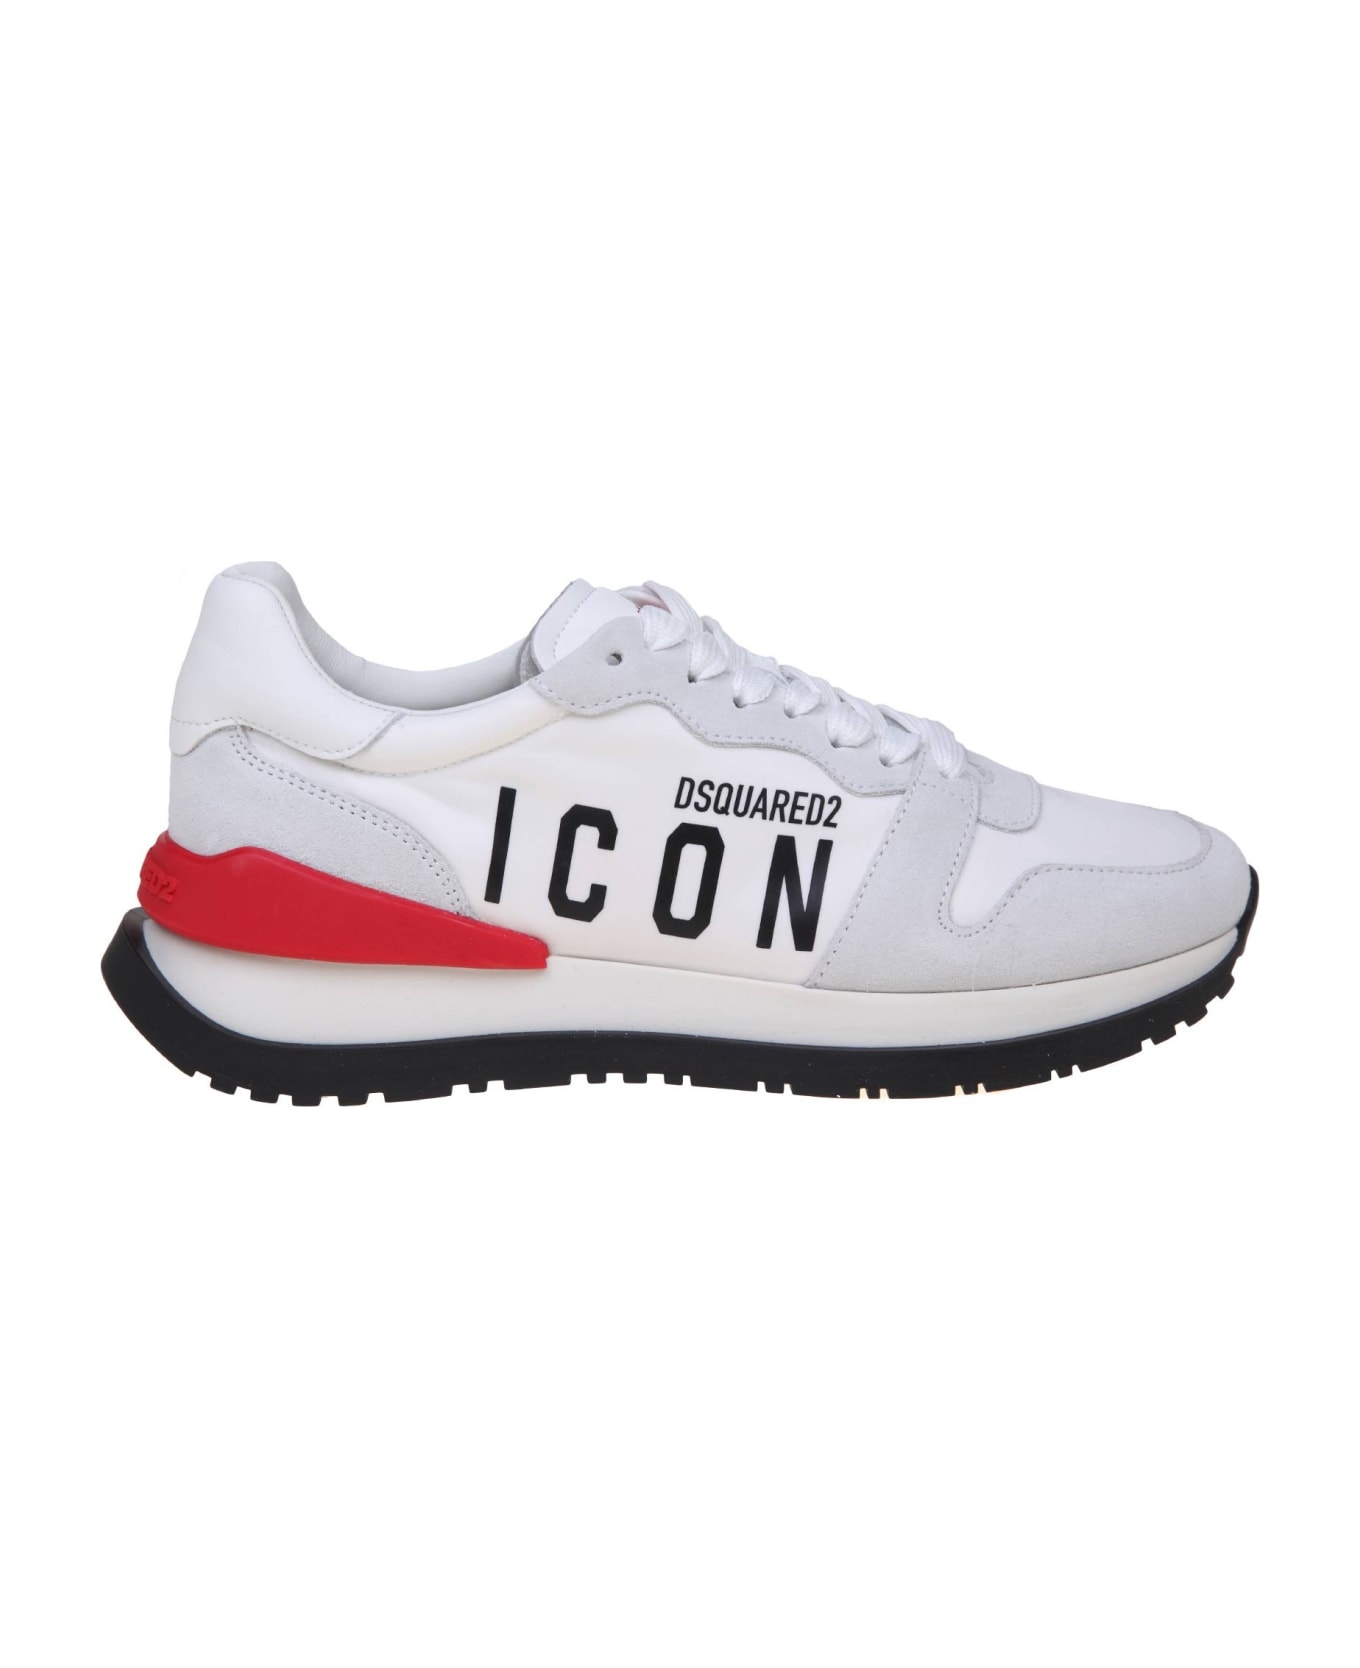 Dsquared2 Suede And Nylon Running Sneakers With Logo - White/Red